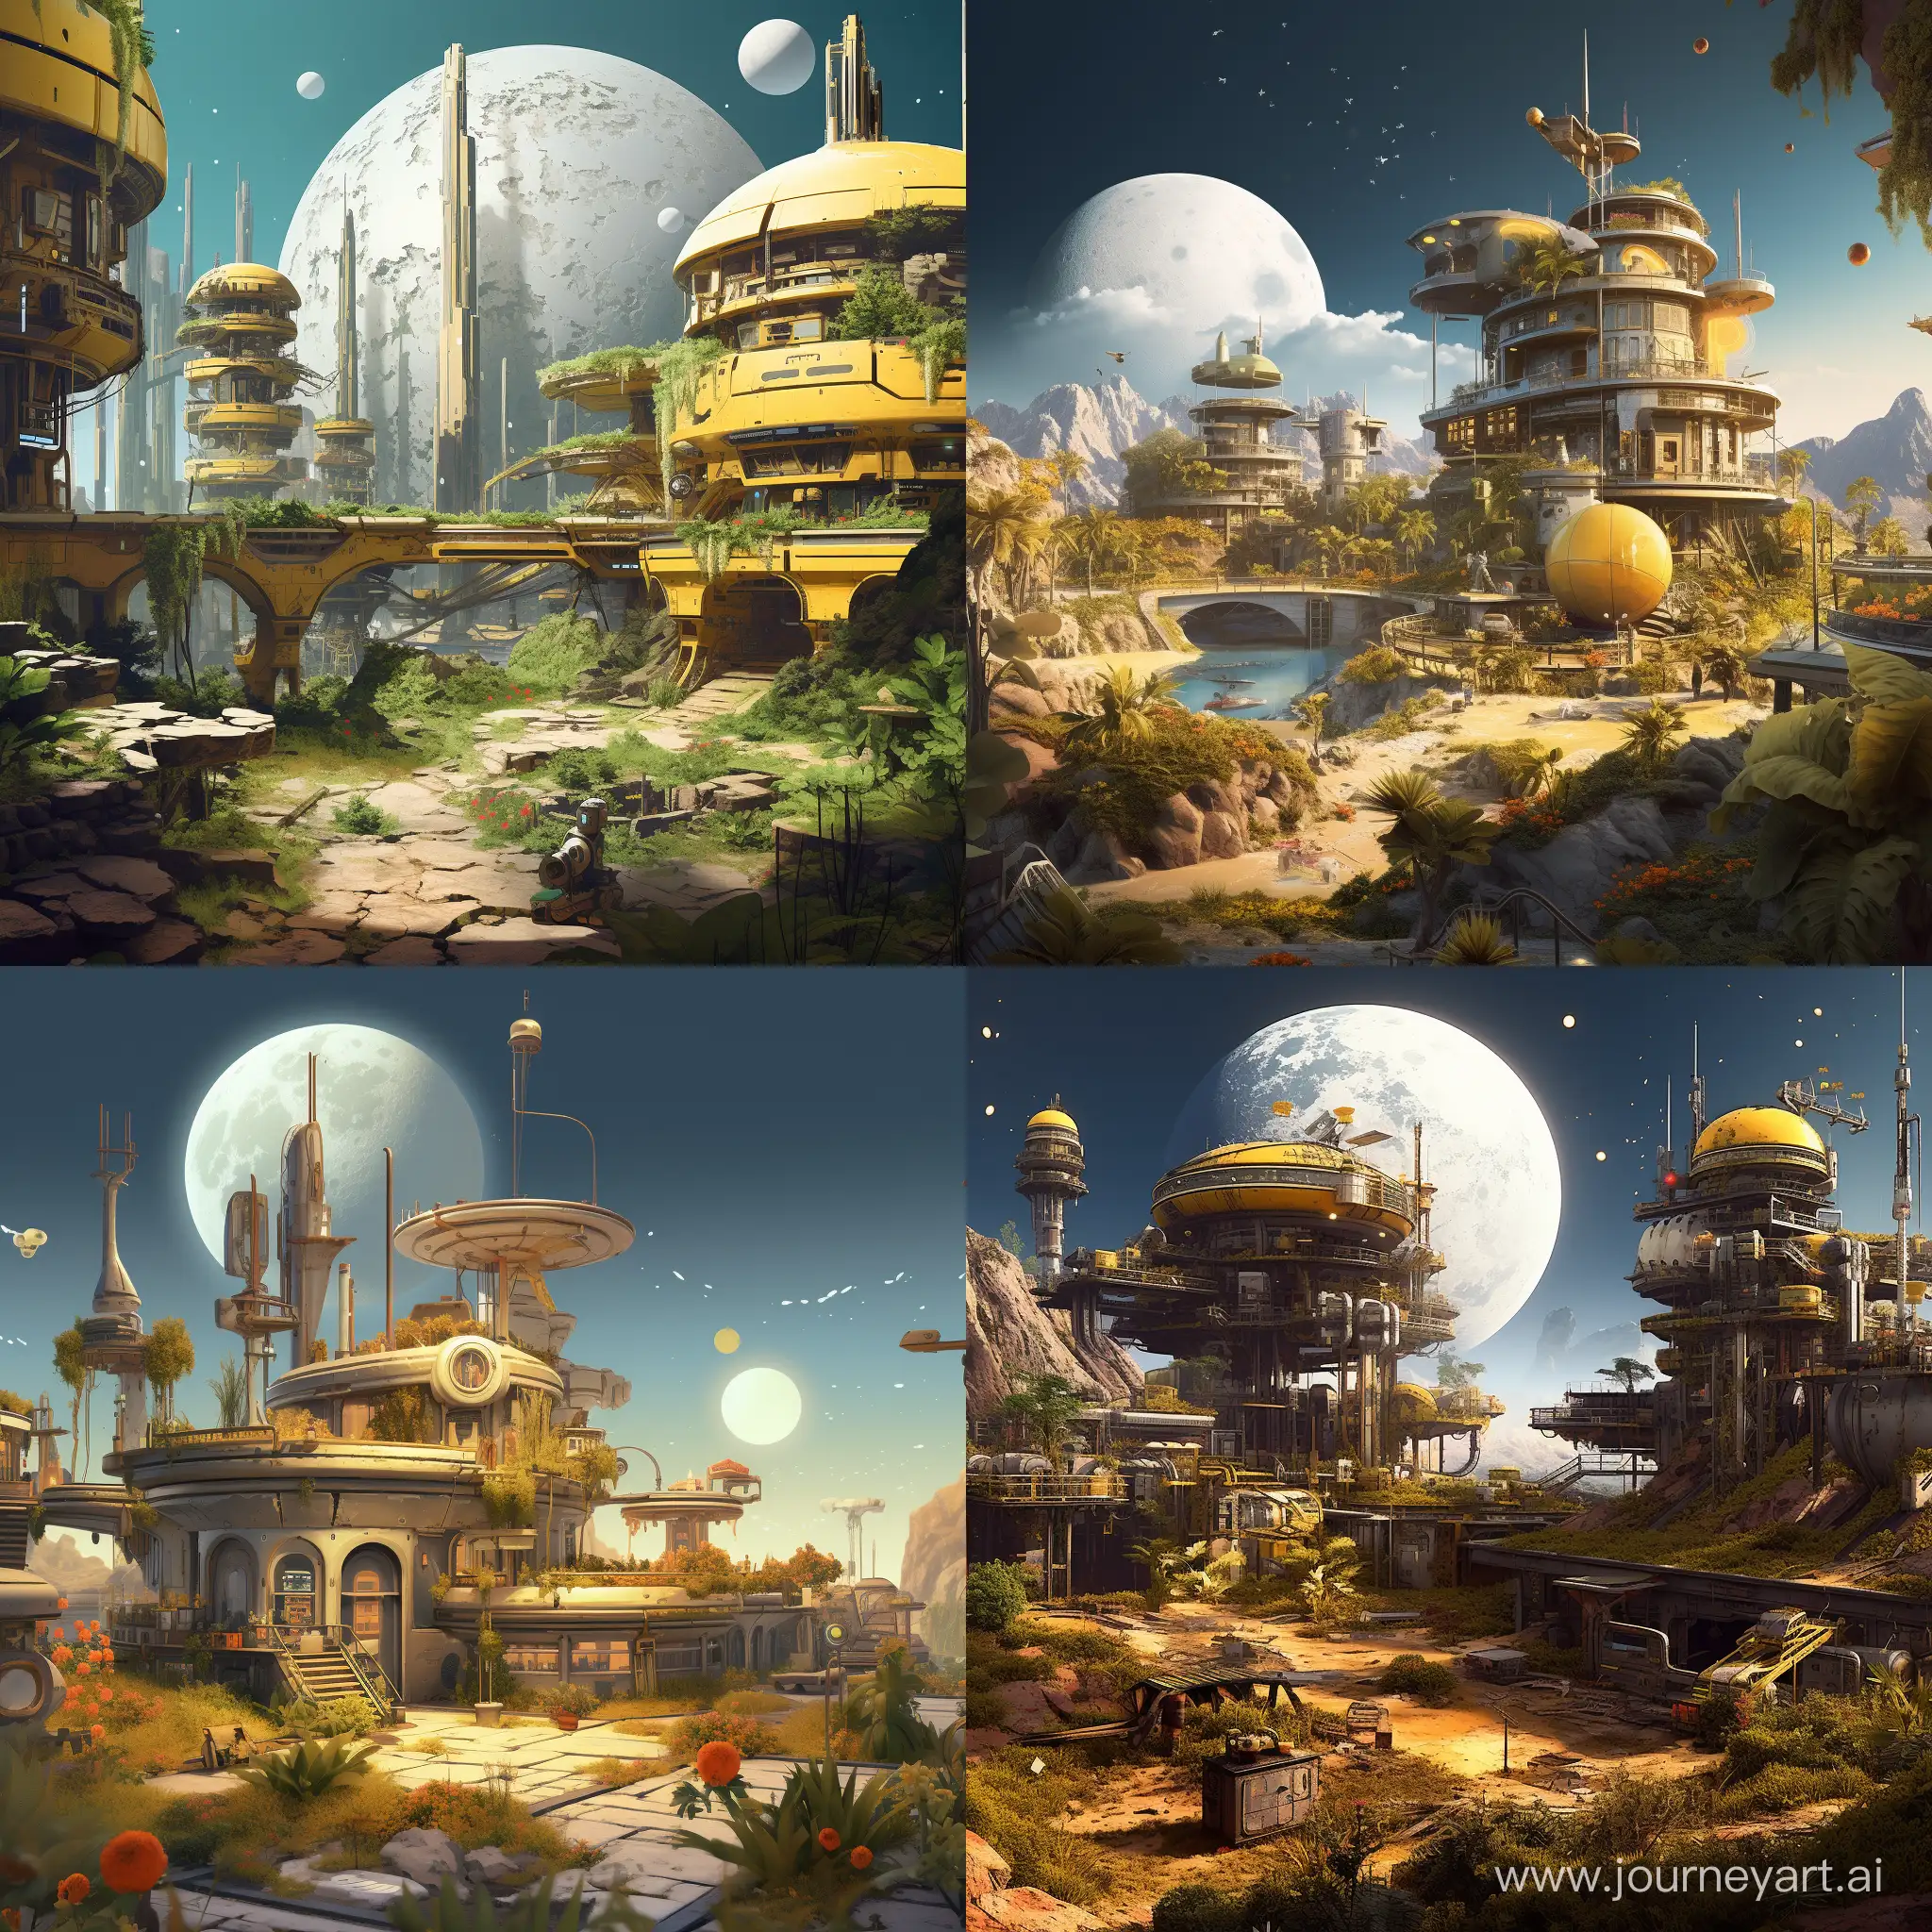 Retro-Futuristic-Moon-Outpost-with-Spaceships-and-Abandoned-Ships